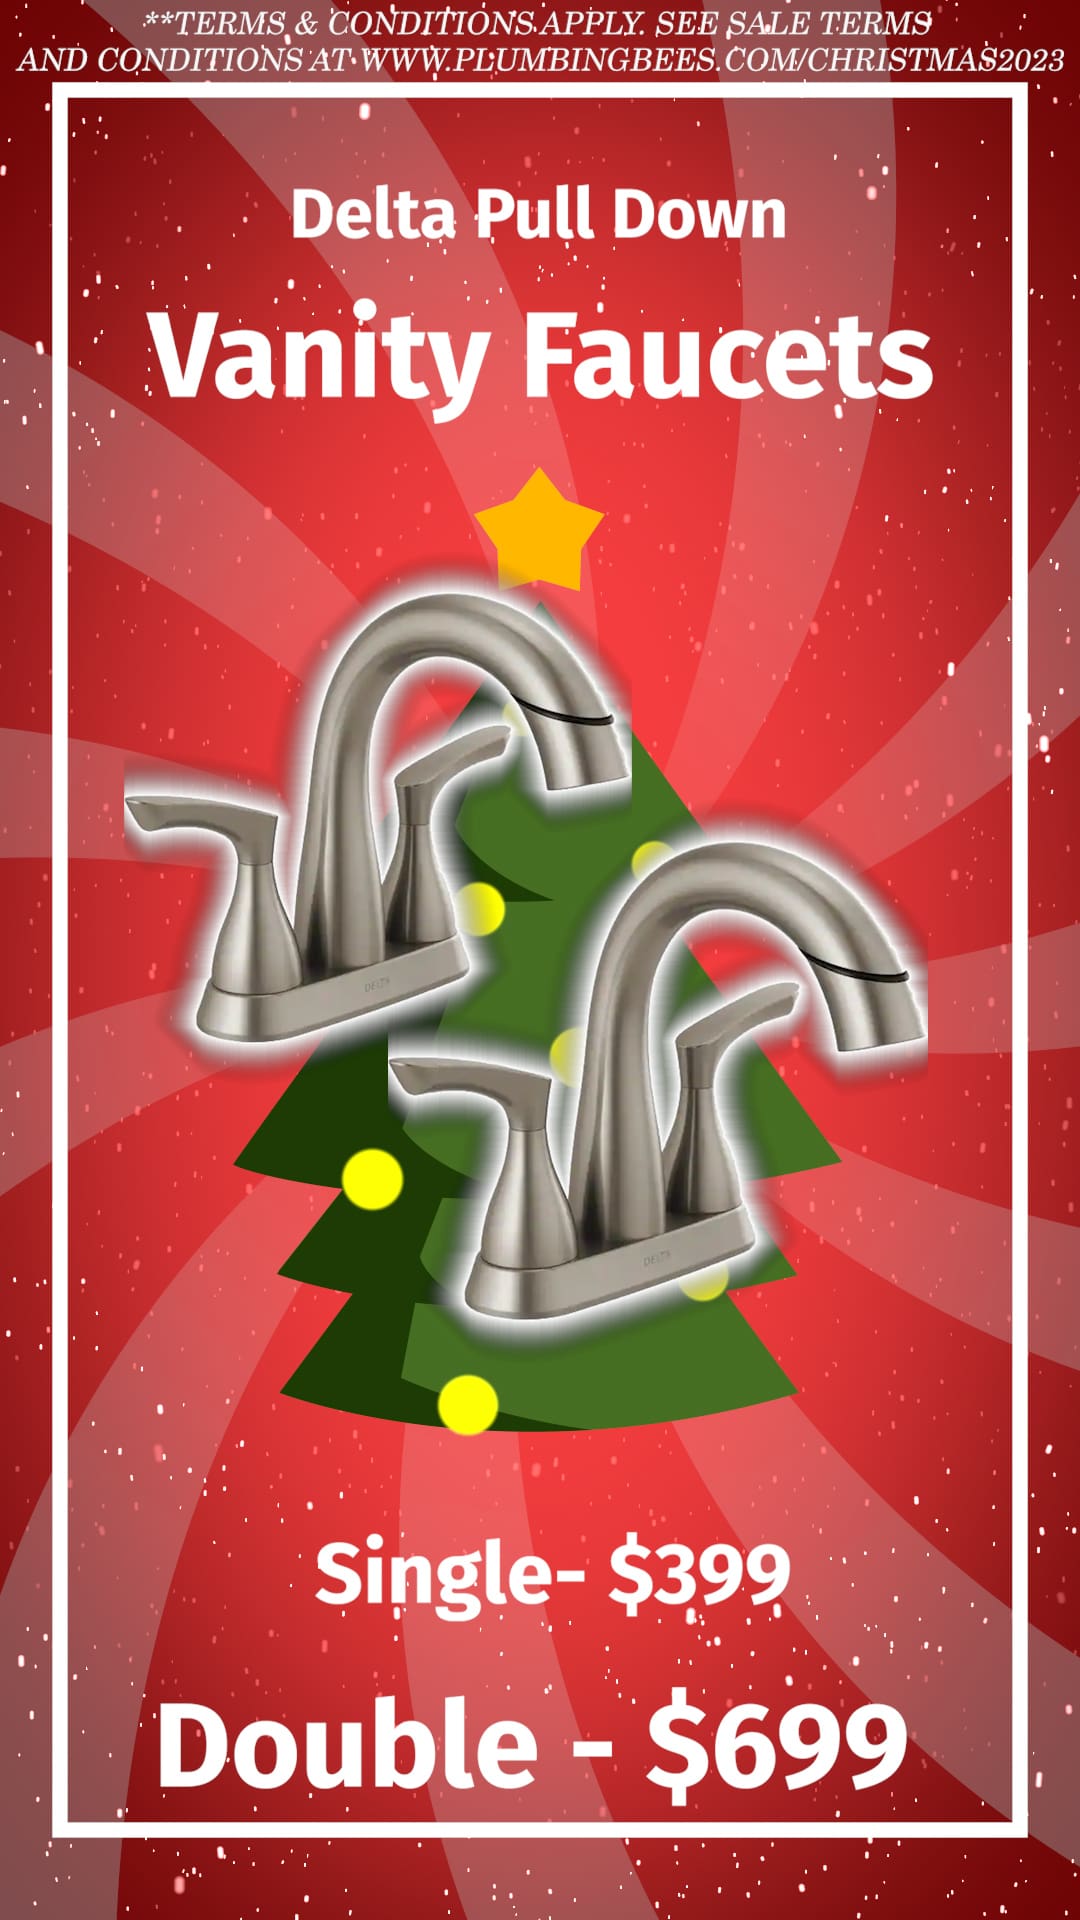 Advertisement for Honey Bee Plumbing's Christmas 2023 special, showcasing a selection of bathroom lavatory faucets. The company's logo is at the center, surrounded by festive decorations like holly and lights, with a color scheme of red, green, and gold. The faucets are displayed with an eye-catching design, emphasizing the holiday offer.